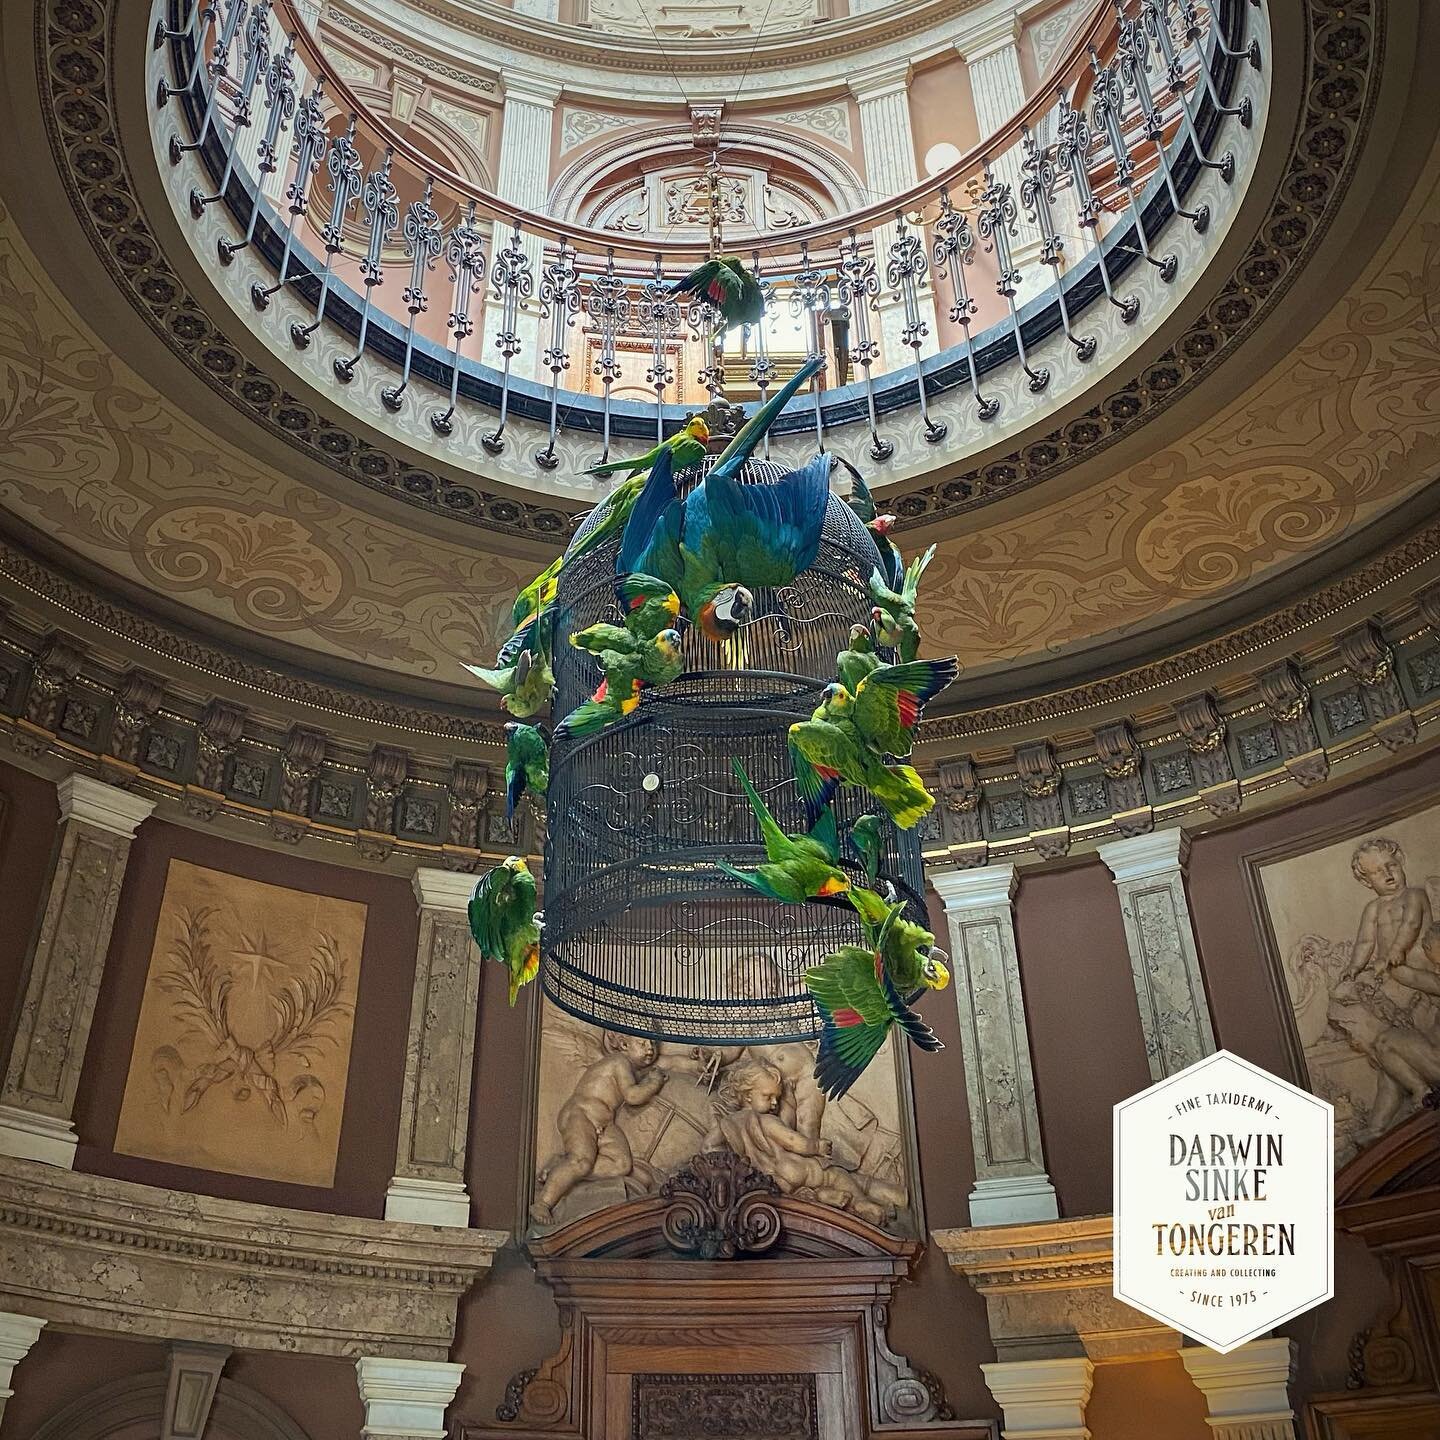 DSvT works at the Teylers Museum in the Netherlands. Exhibition called &lsquo;Vogelpracht&rsquo; is now open! Lots of work by Audubon on display. Birdcage is sold. Audubon display is available. #teylersmuseum #audubon #finetaxidermy #exhibition #haar